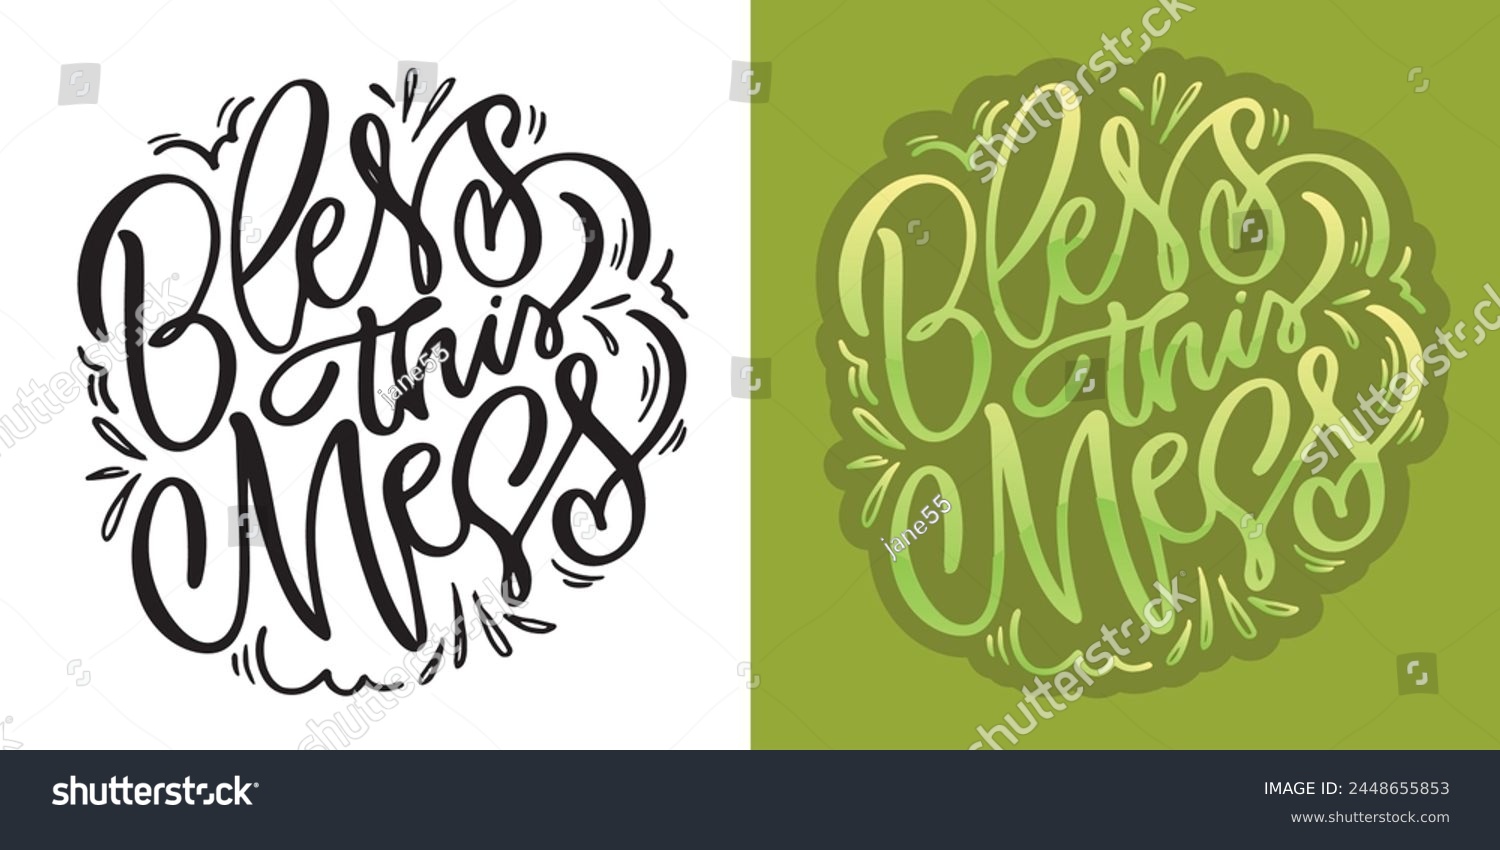 SVG of Bless this mess. Funny hand drawn doodle lettering postcard quote. T-shirt design, clothes print, mug print. Lettering art. svg